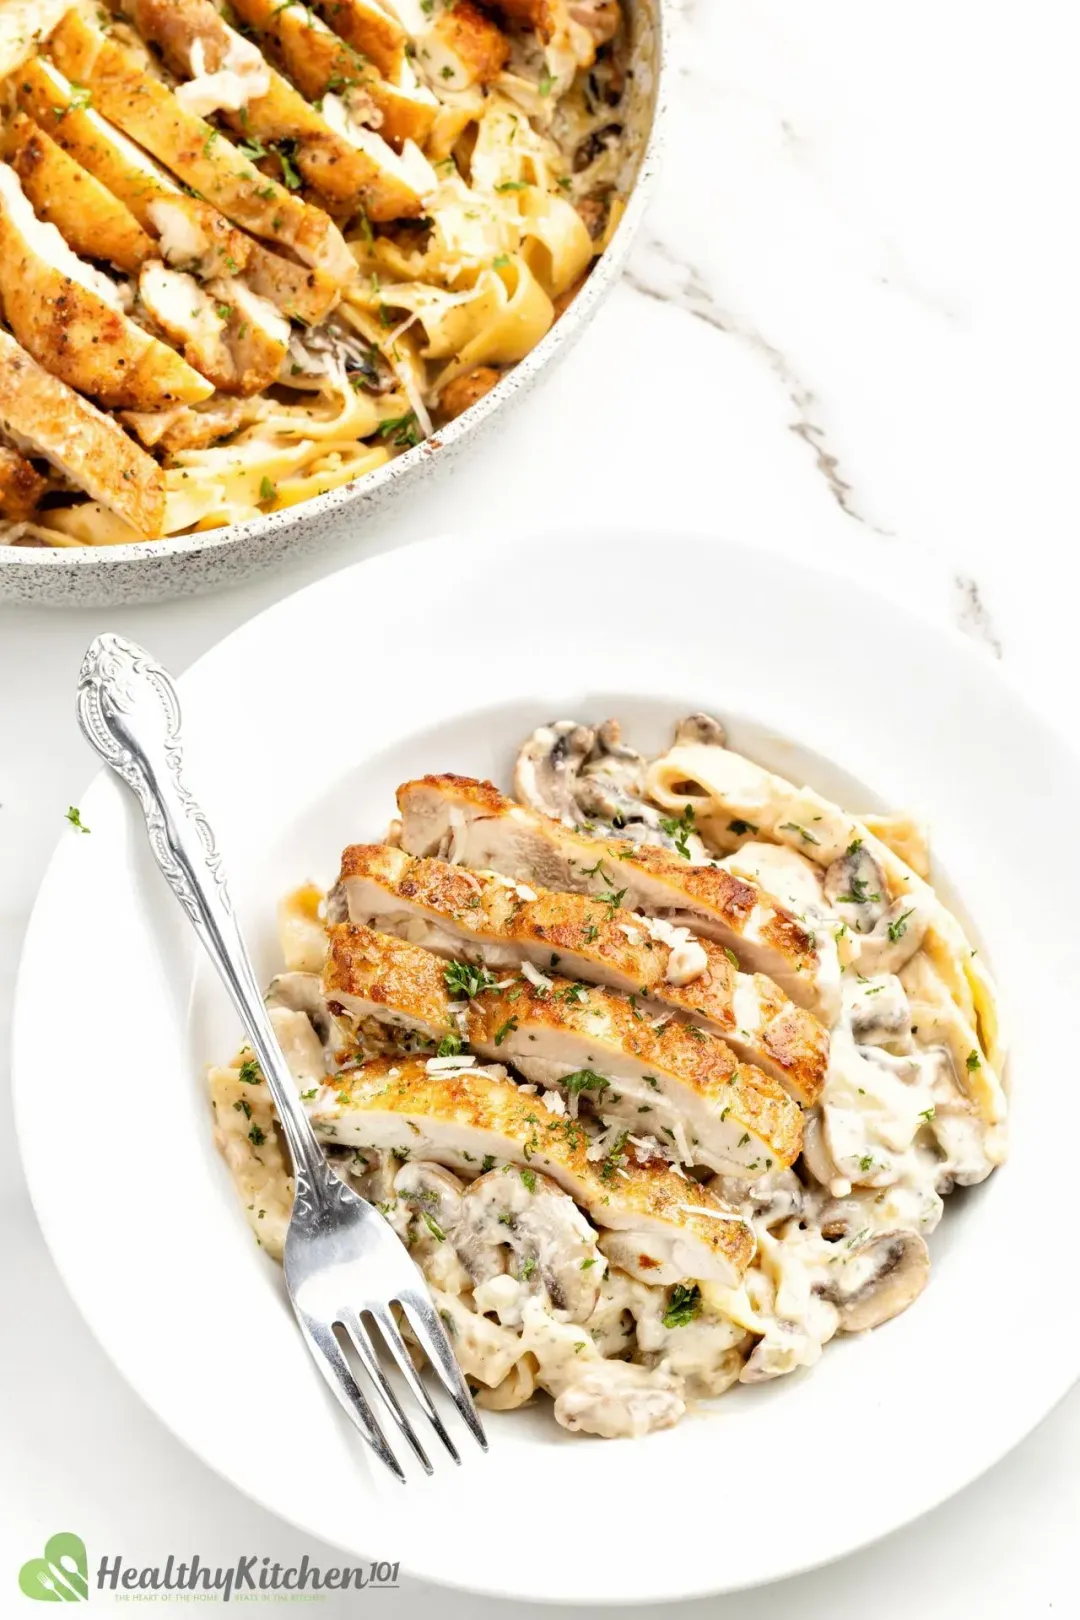 A plate of cooked chicken thigh next to a chicken thigh skillet, full of sliced grilled chicken, mushrooms, pasta, and white mushroom sauce